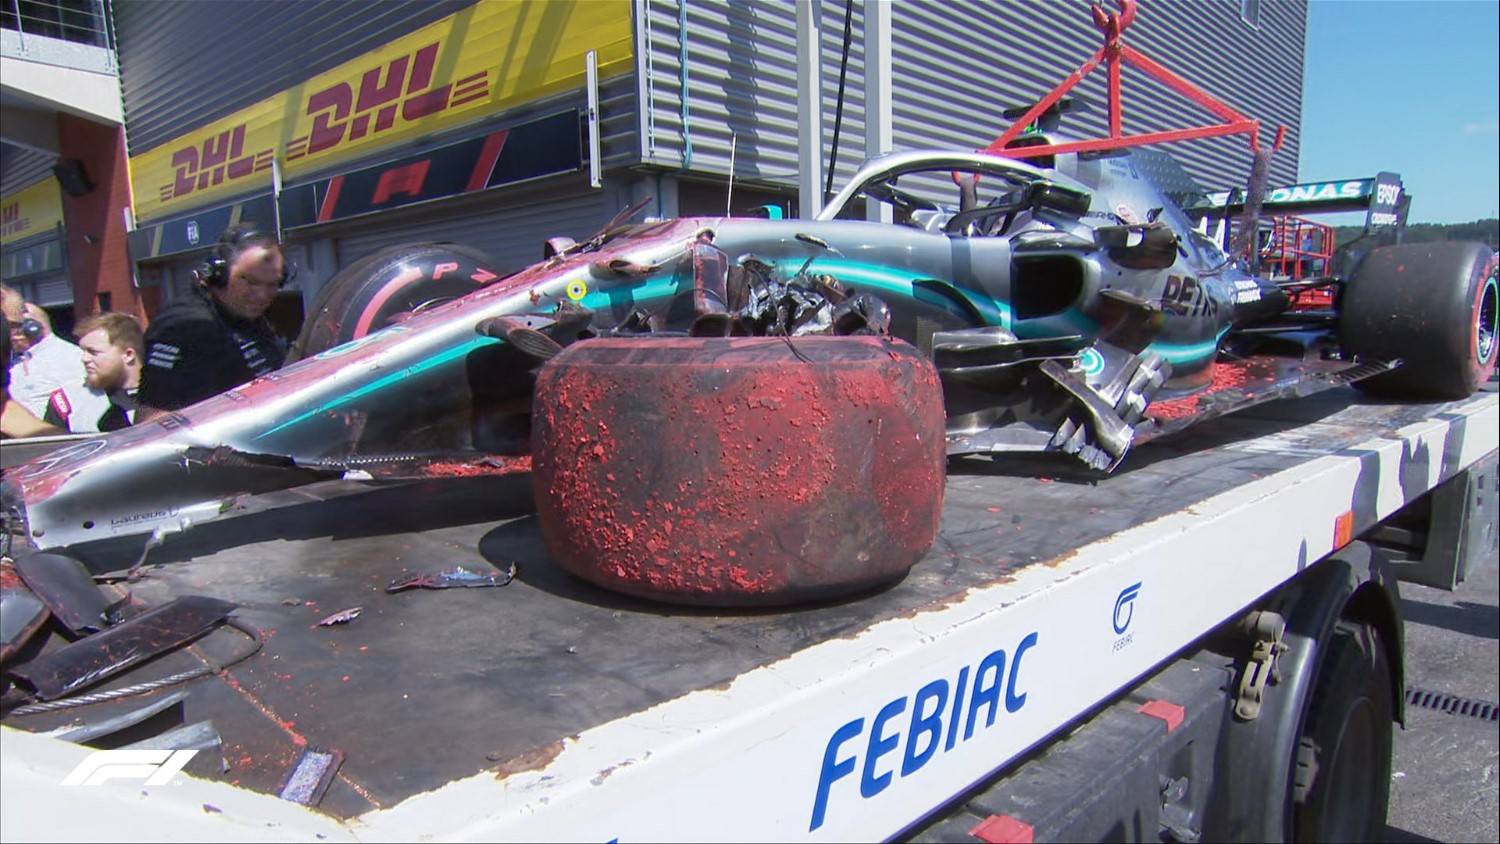 Hamilton's wrecked car comes back on the flatbed